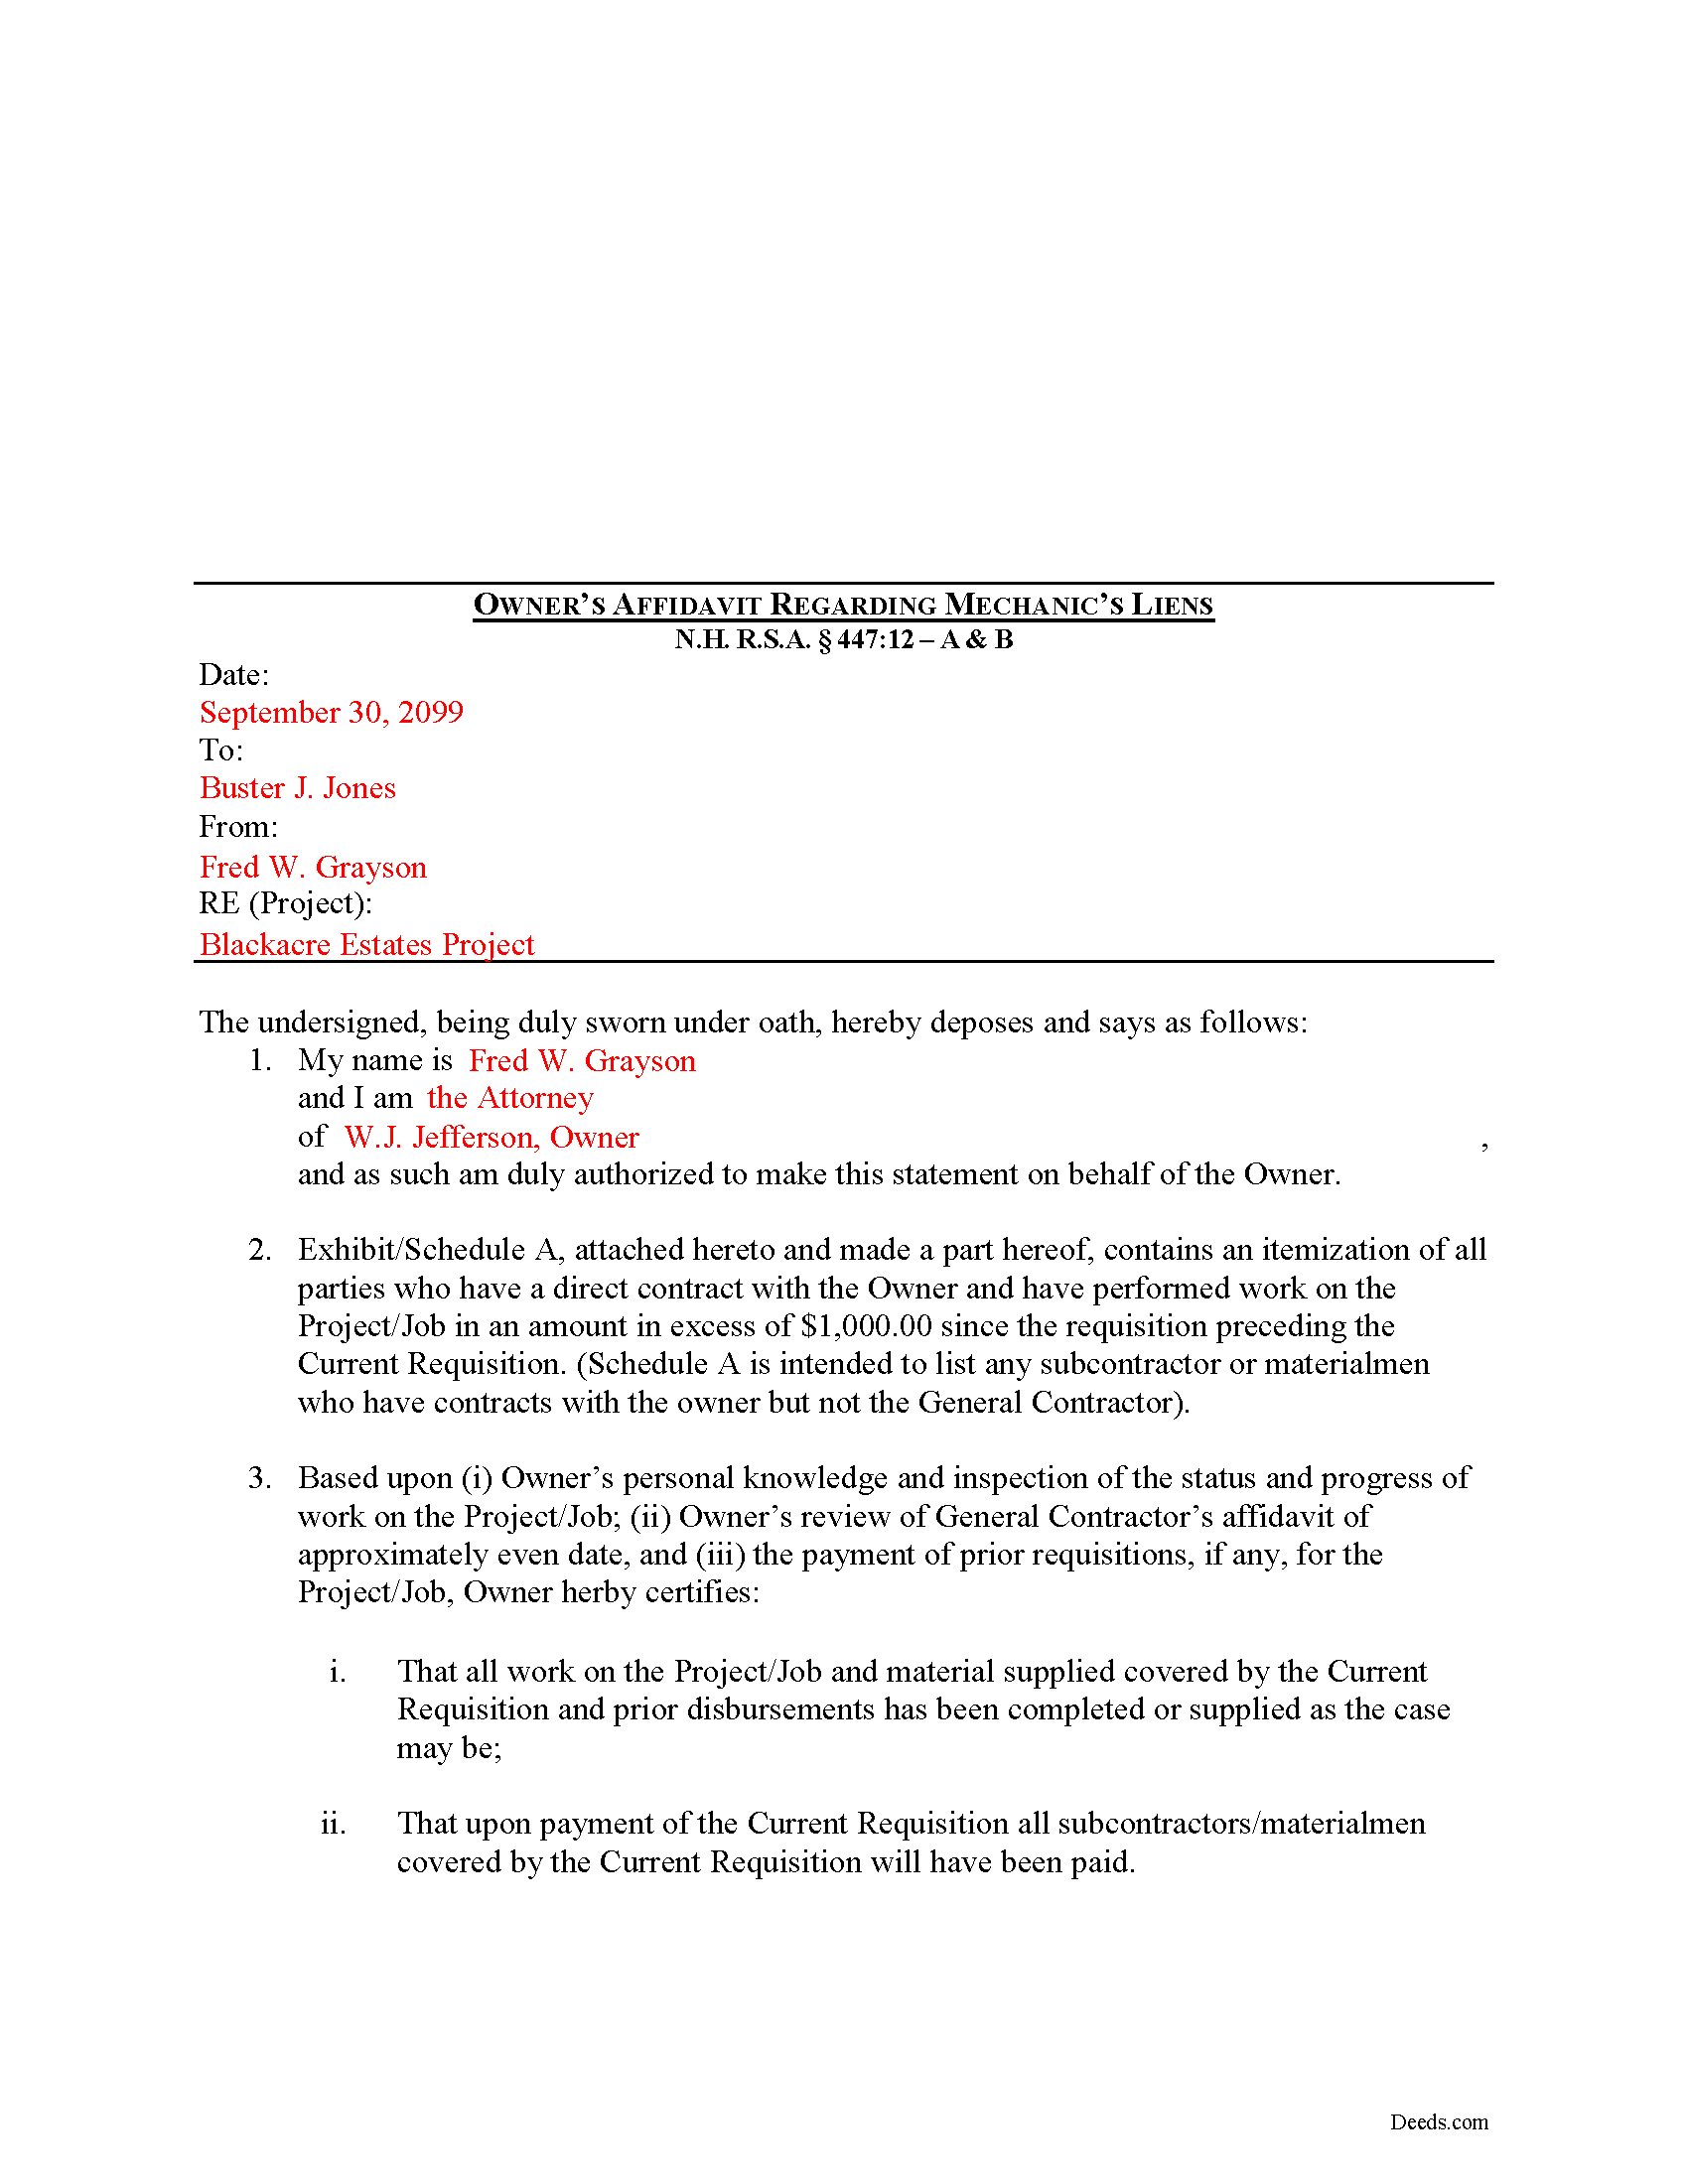 Completed Example of the Owners Affidavit Document